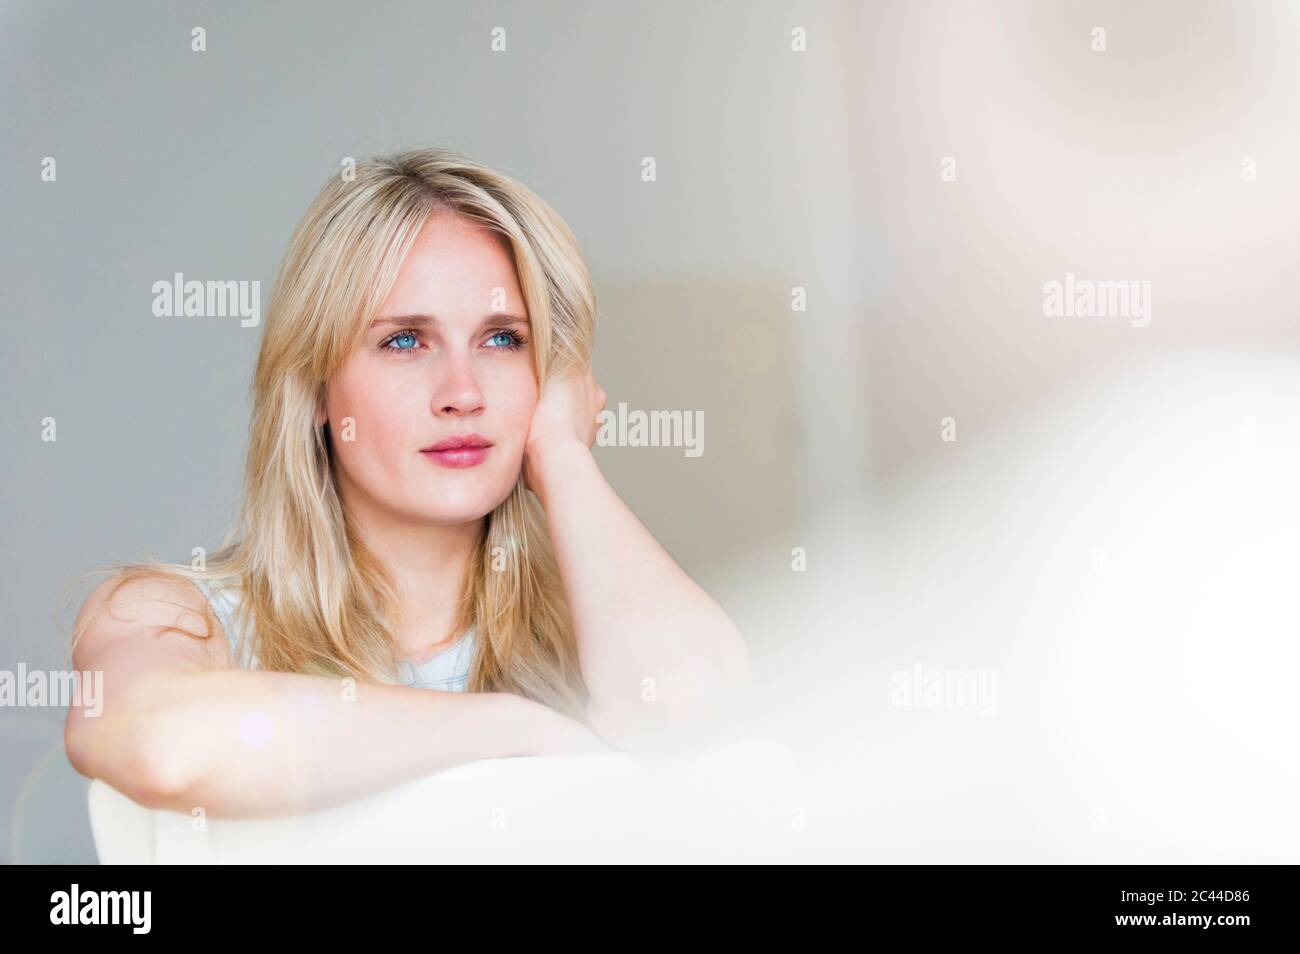 Portrait of pensive blond woman with blue eyes leaning on back rest Stock Photo